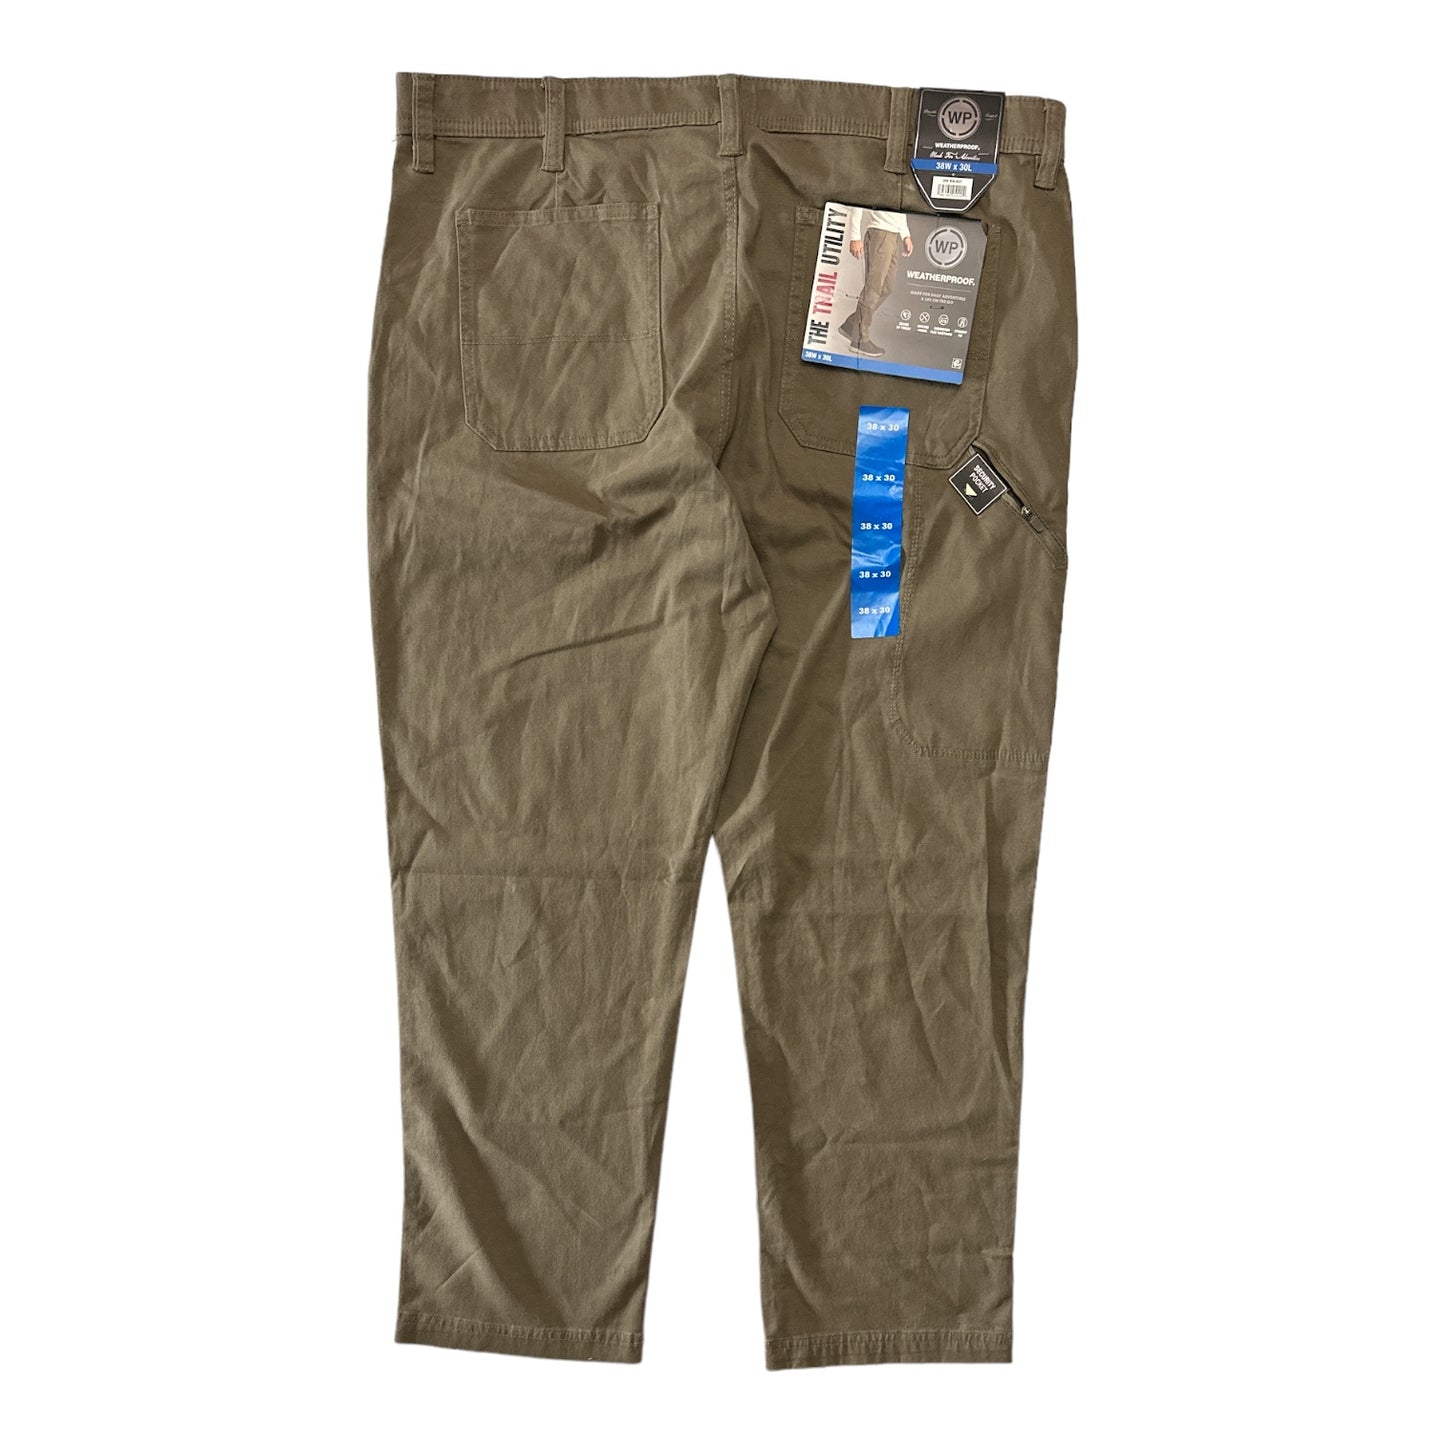 WP Weatherproof The Trail Utility Stretch Flex Waistband Straight Fit Pant